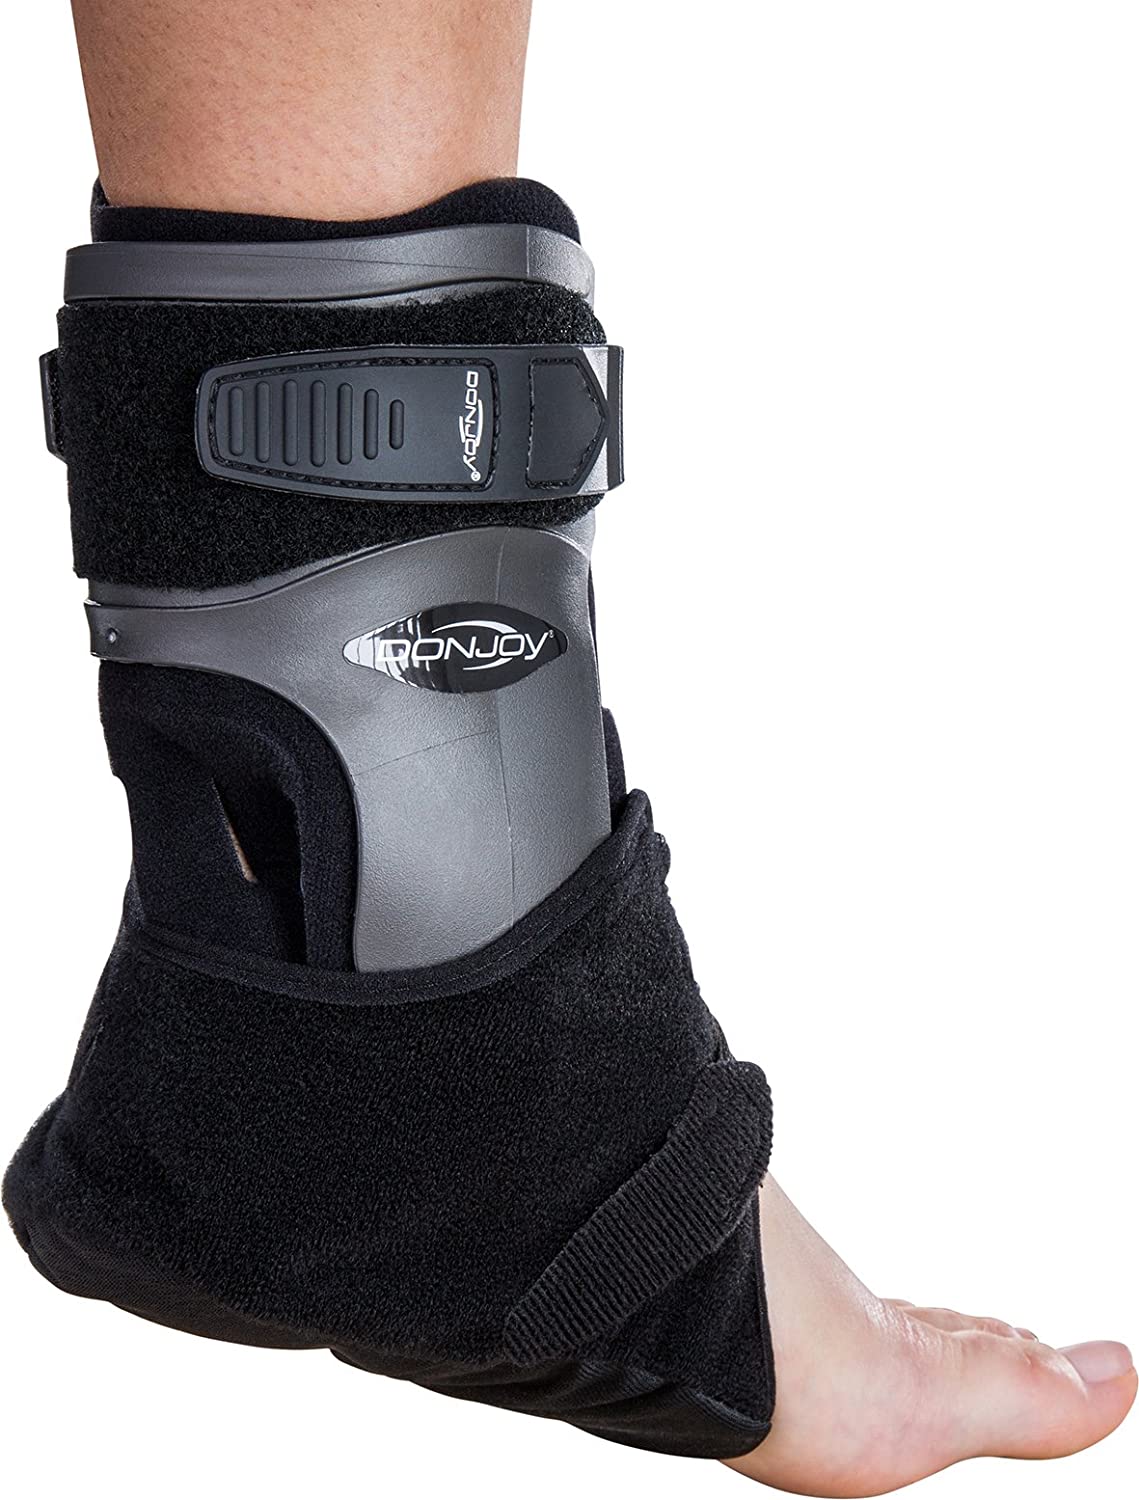 Left　Brace:　Standard　ES　Fo-　DonJoy　(Extra　Ankle　Velocity　Support)　Calf，